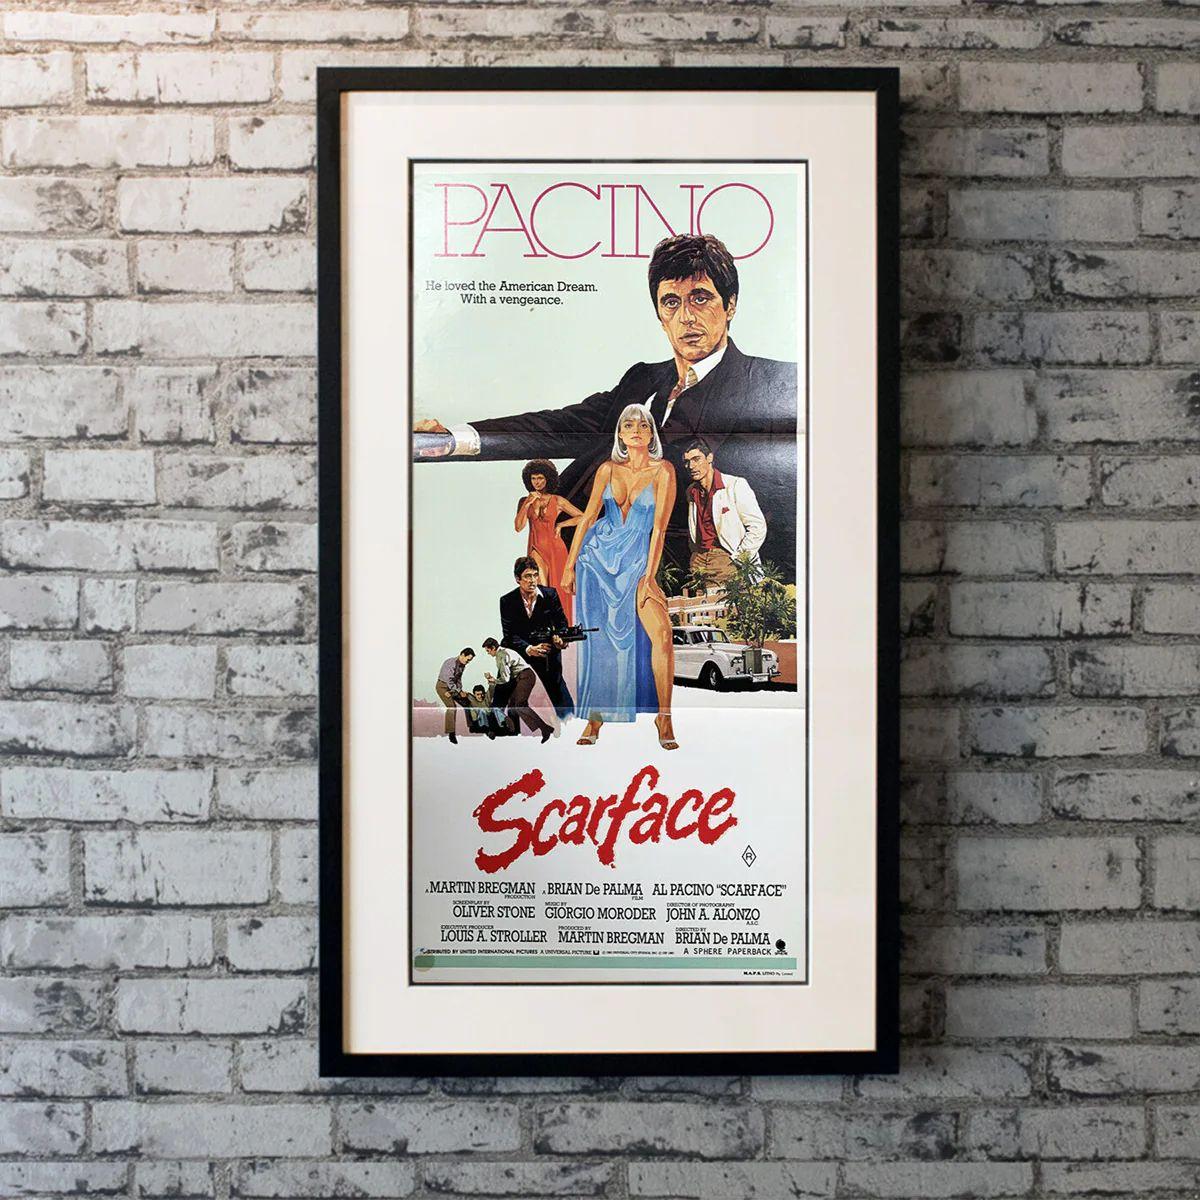 Scarface, Unframed Poster, 1983

Original Australian Daybill (13 X 30 Inches). In 1980 Miami, a determined Cuban immigrant takes over a drug cartel and succumbs to greed

Additional Information:
Year: 1983
Nationality: Australian
Condition: